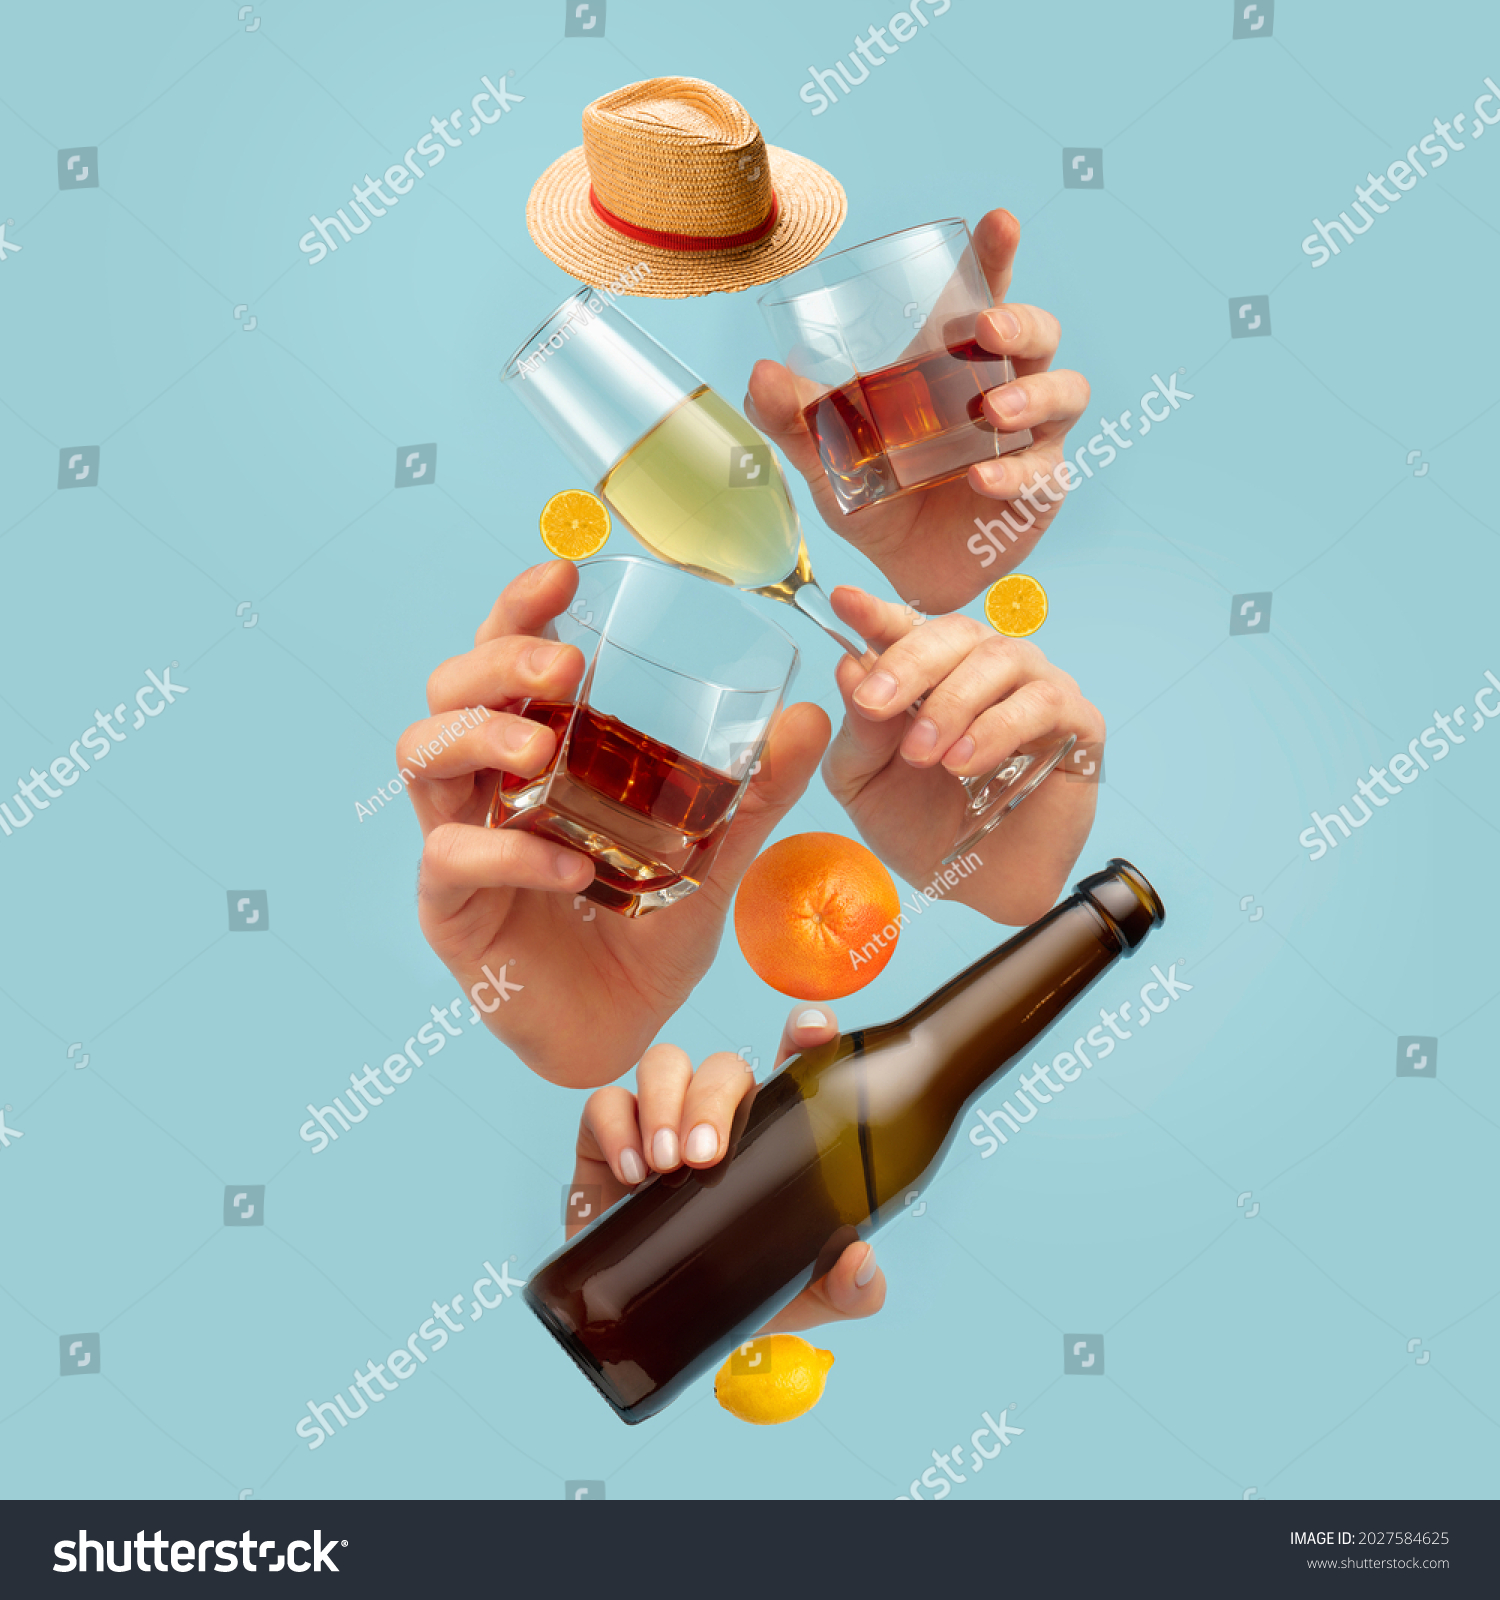 Drinks of your choice. Modern composition in magazine style with human hands holding glasses for alcohol drinks over blue background. Copyspace for ad, offer #2027584625